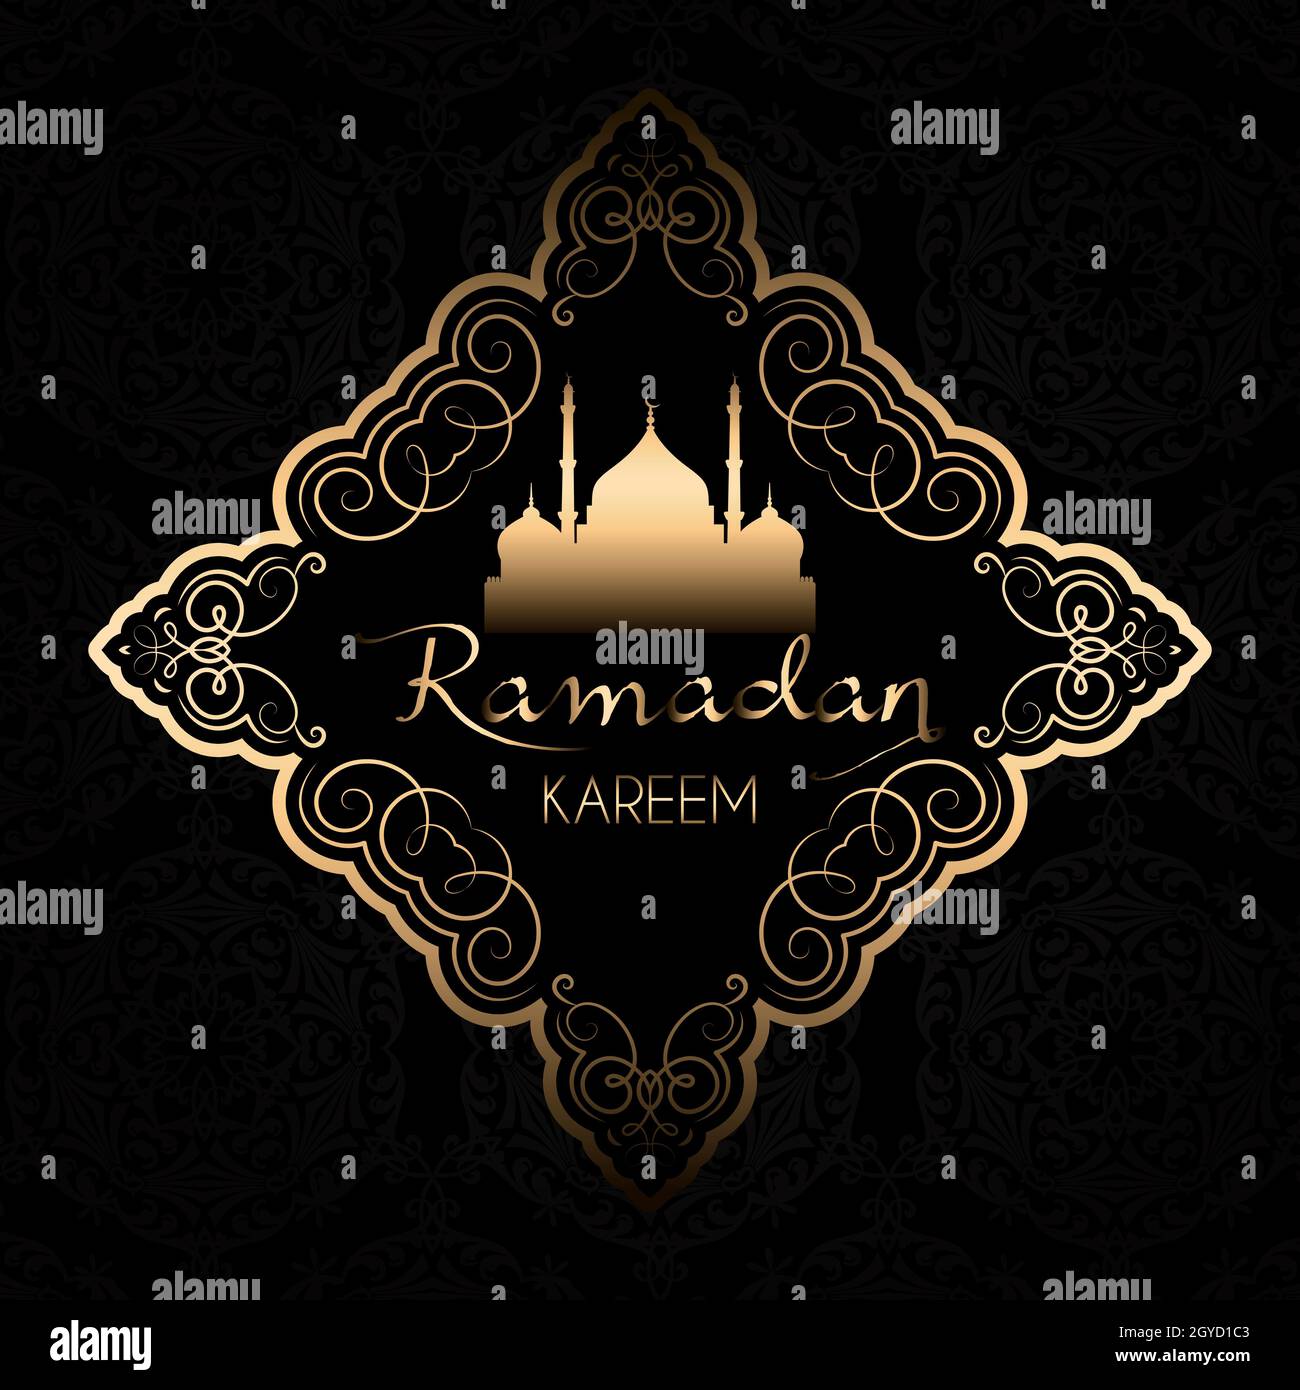 Ramadan Mubarak 2020: Images, Quotes, Wishes, Messages, Pictures and  Greeting Cards to share on Ramzan - Times of India